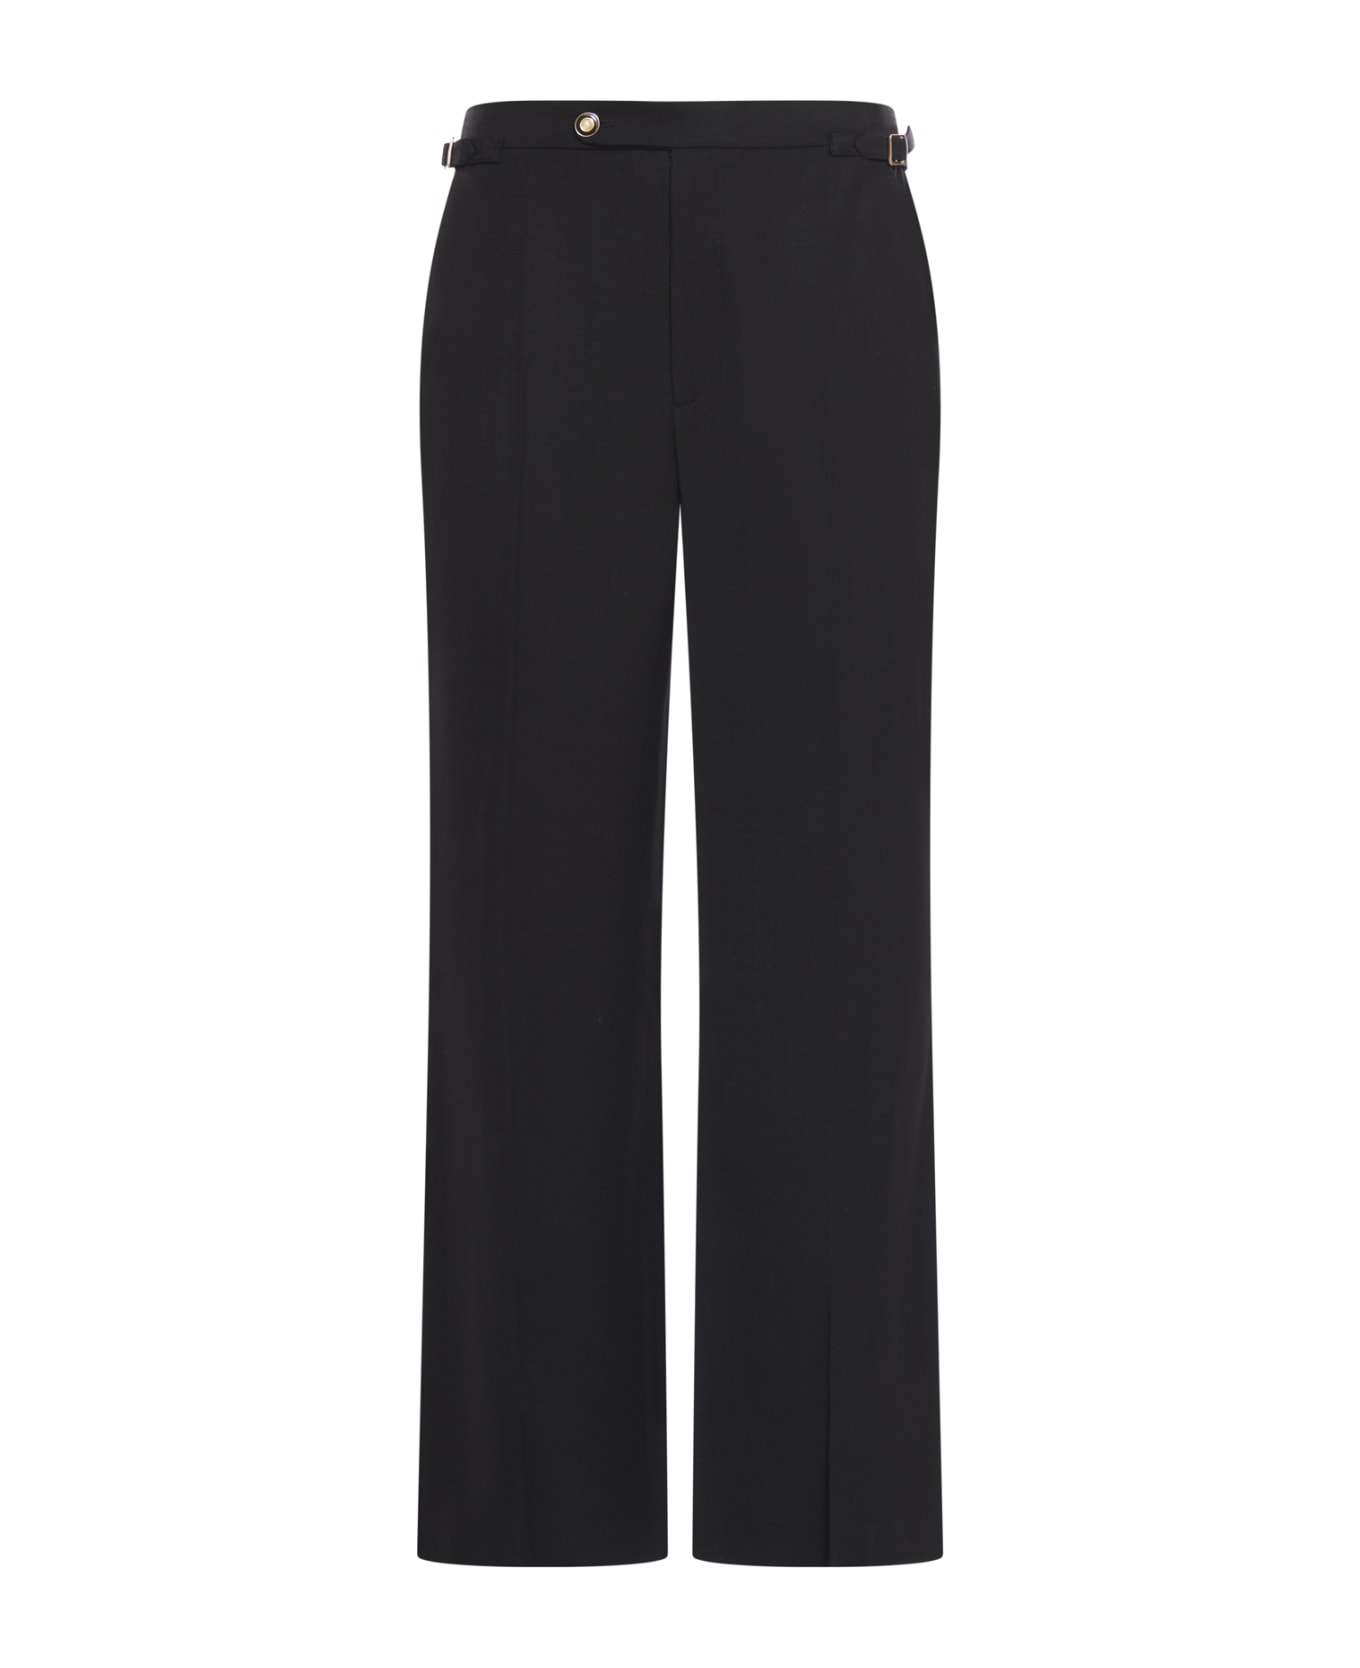 Casablanca Black Trousers With Side Adjusters - Black